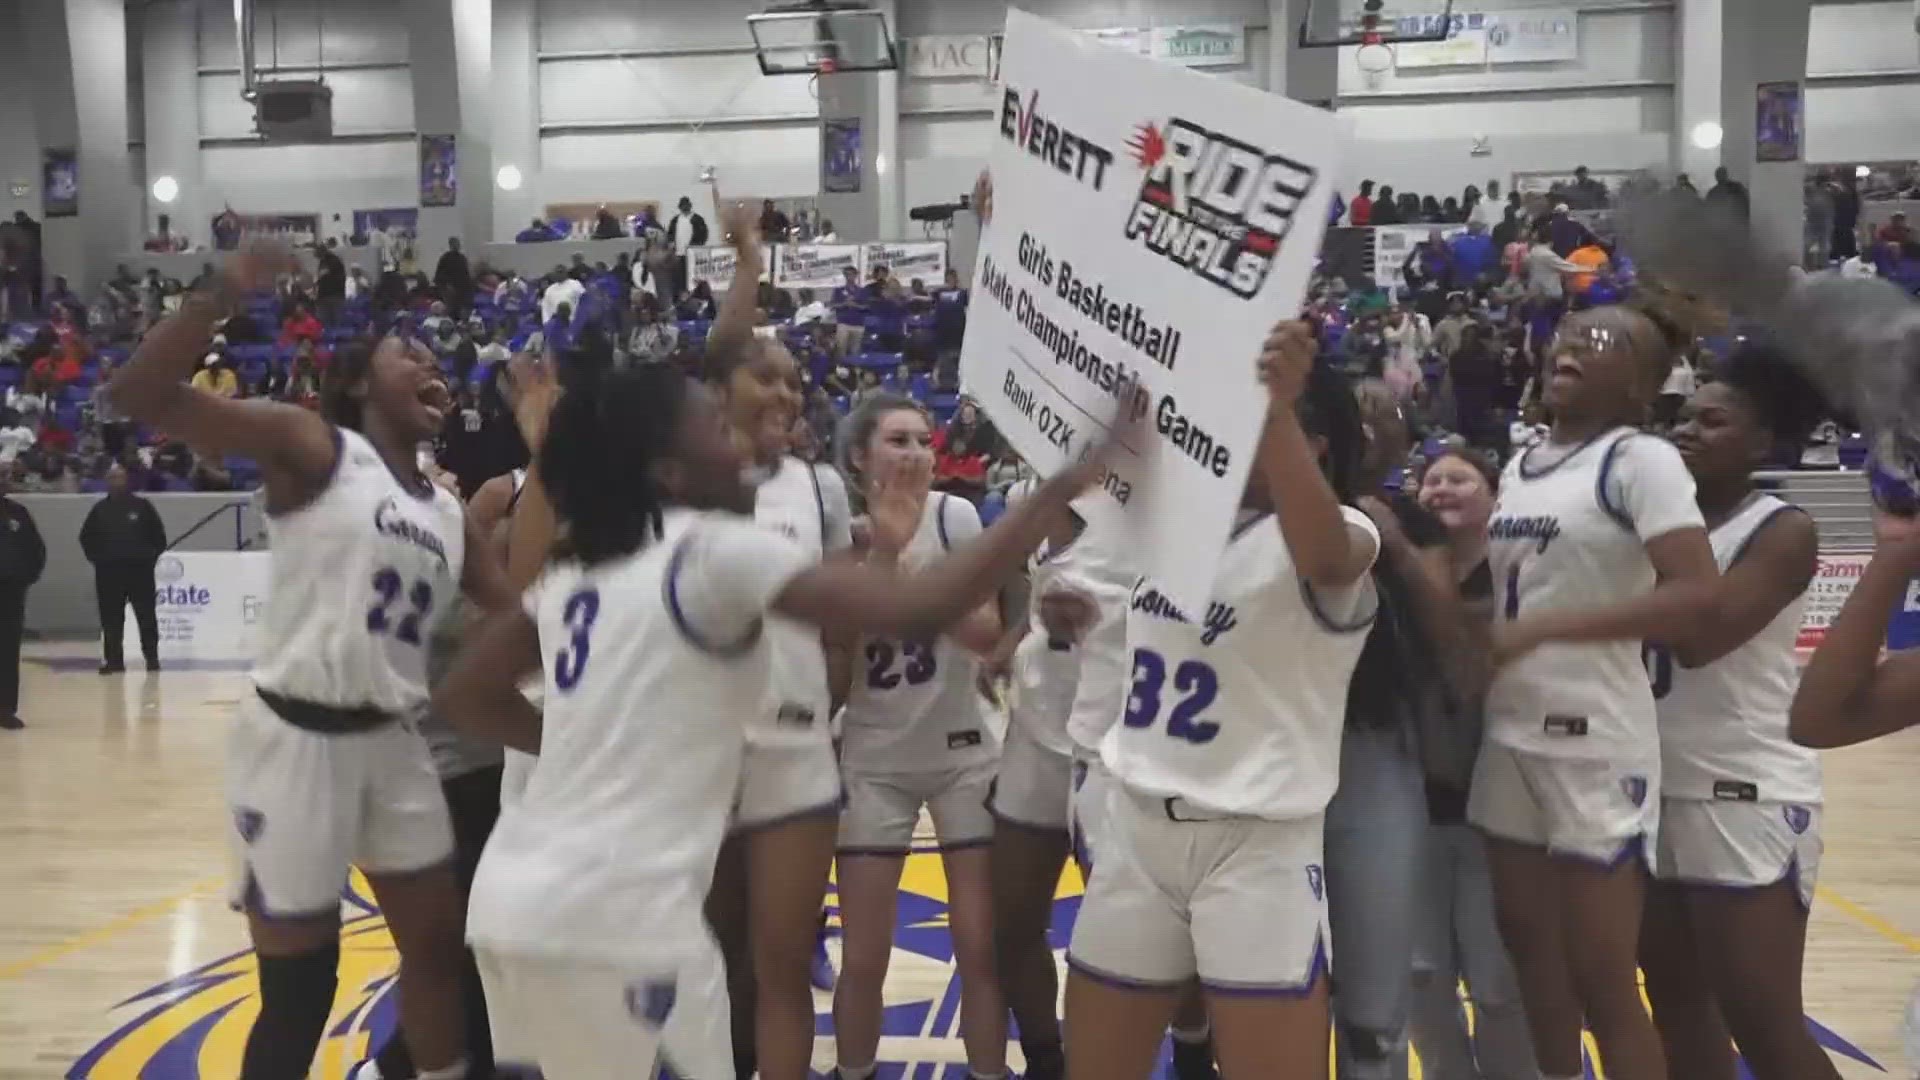 The Wampus Cats will hope to win back-to-back state titles in Hot Springs. They'll take on LR Central for the title.